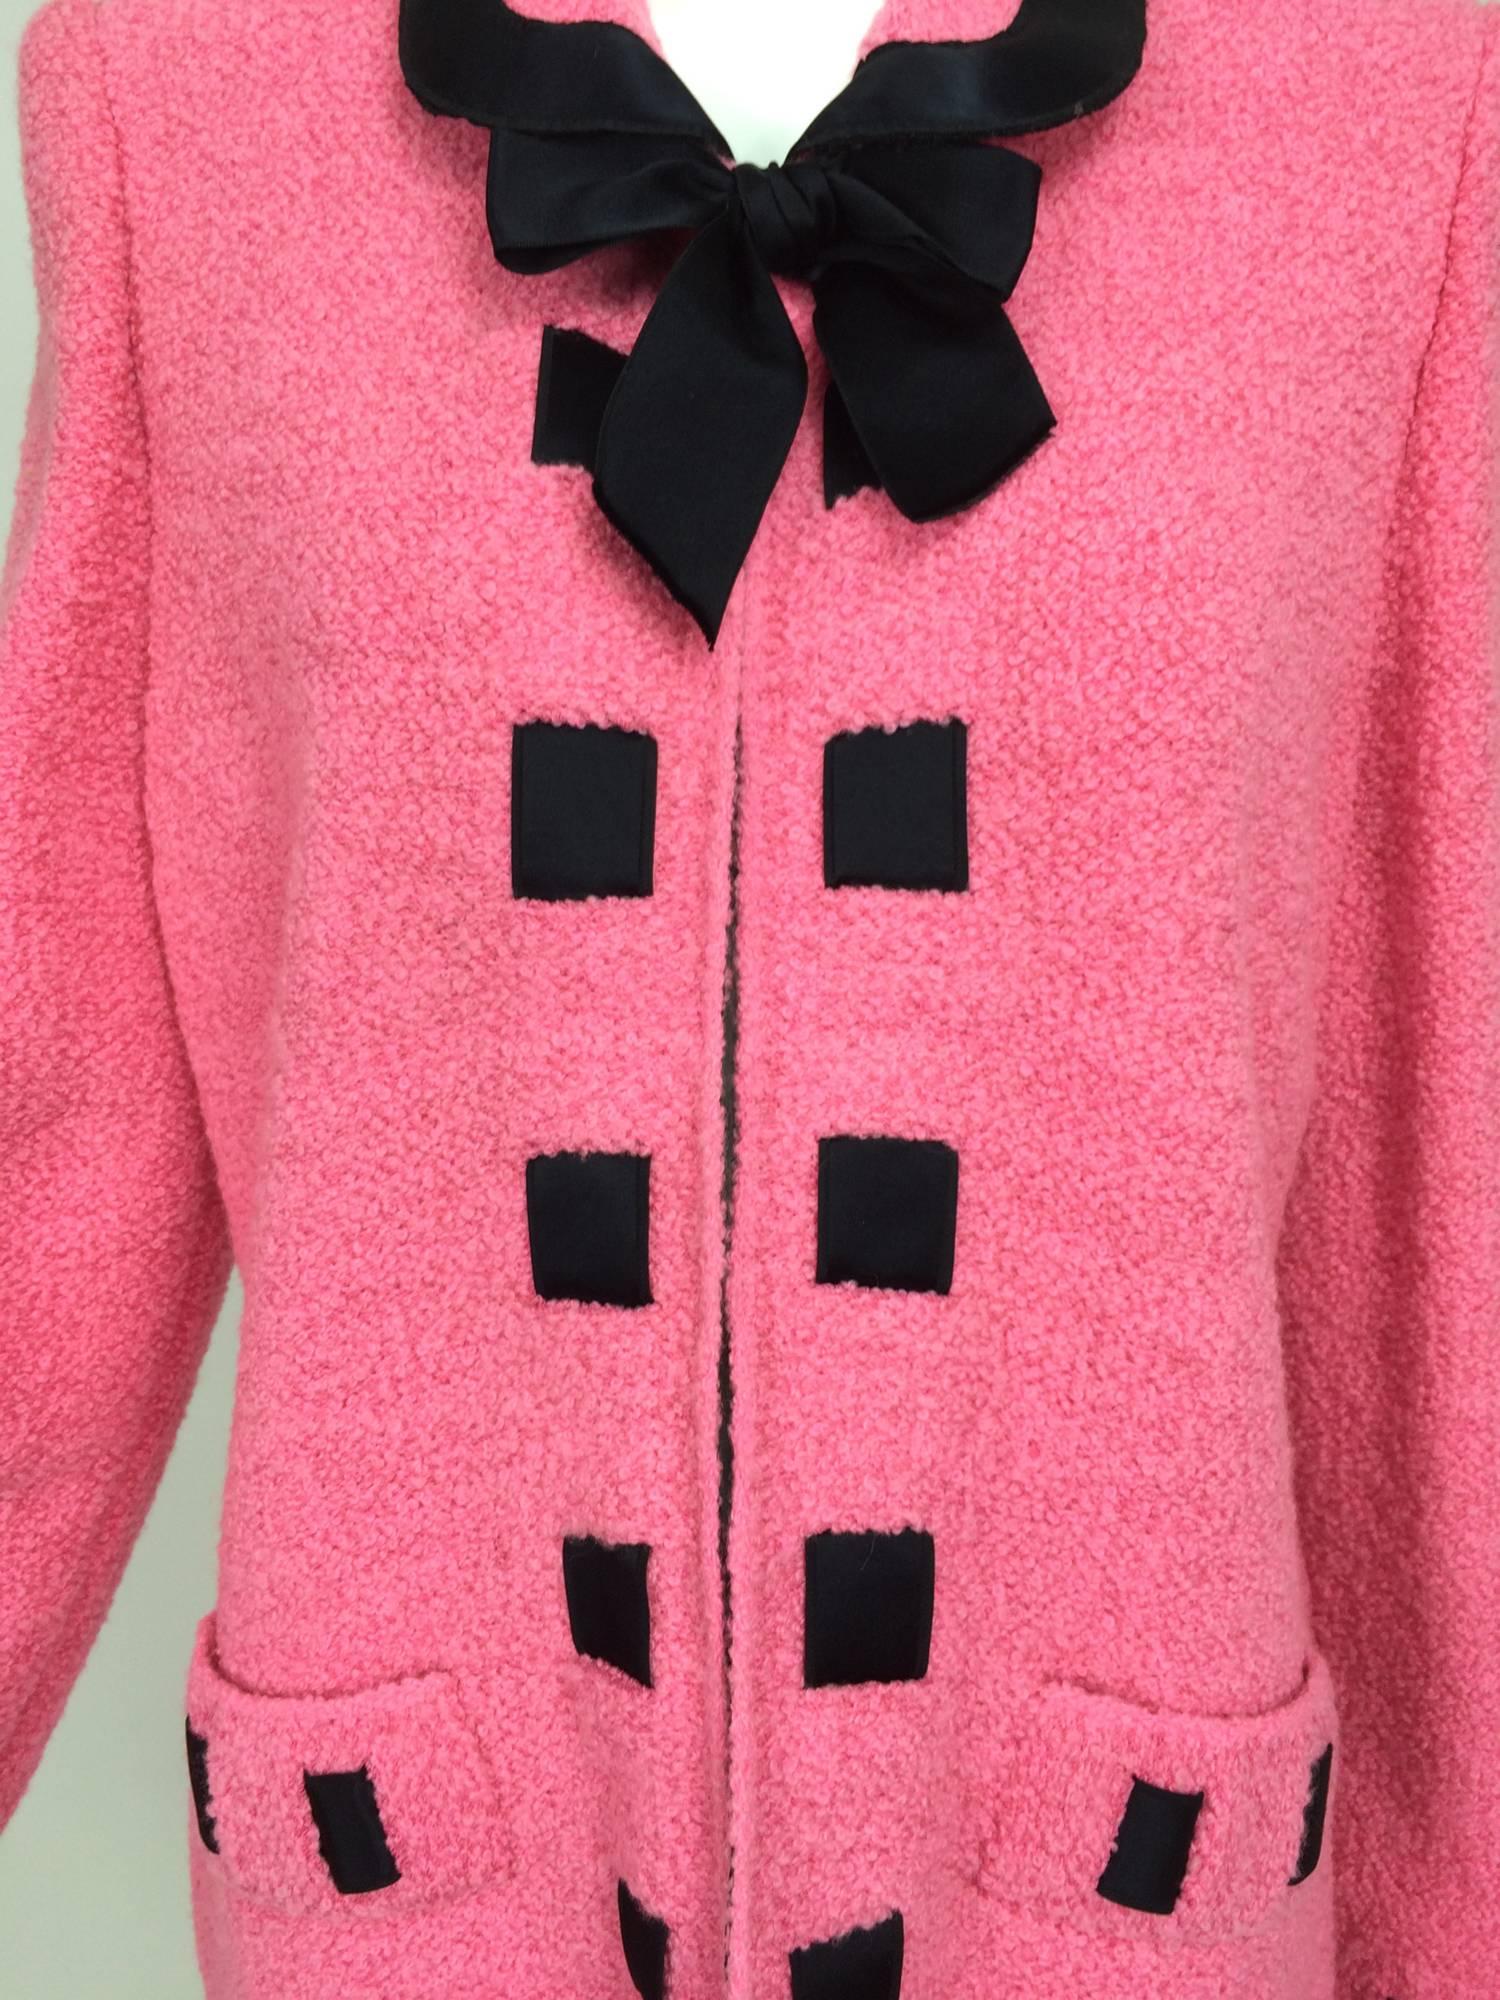 Vintage Adolfo pink & black ribbon trim boucle jacket 1970s...Loose fitting jacket closes at the neck front with a hidden hook and a black satin bow tie (snaps on), the jacket is open below with no fastenings...Trimmed in black satin woven ribbon at